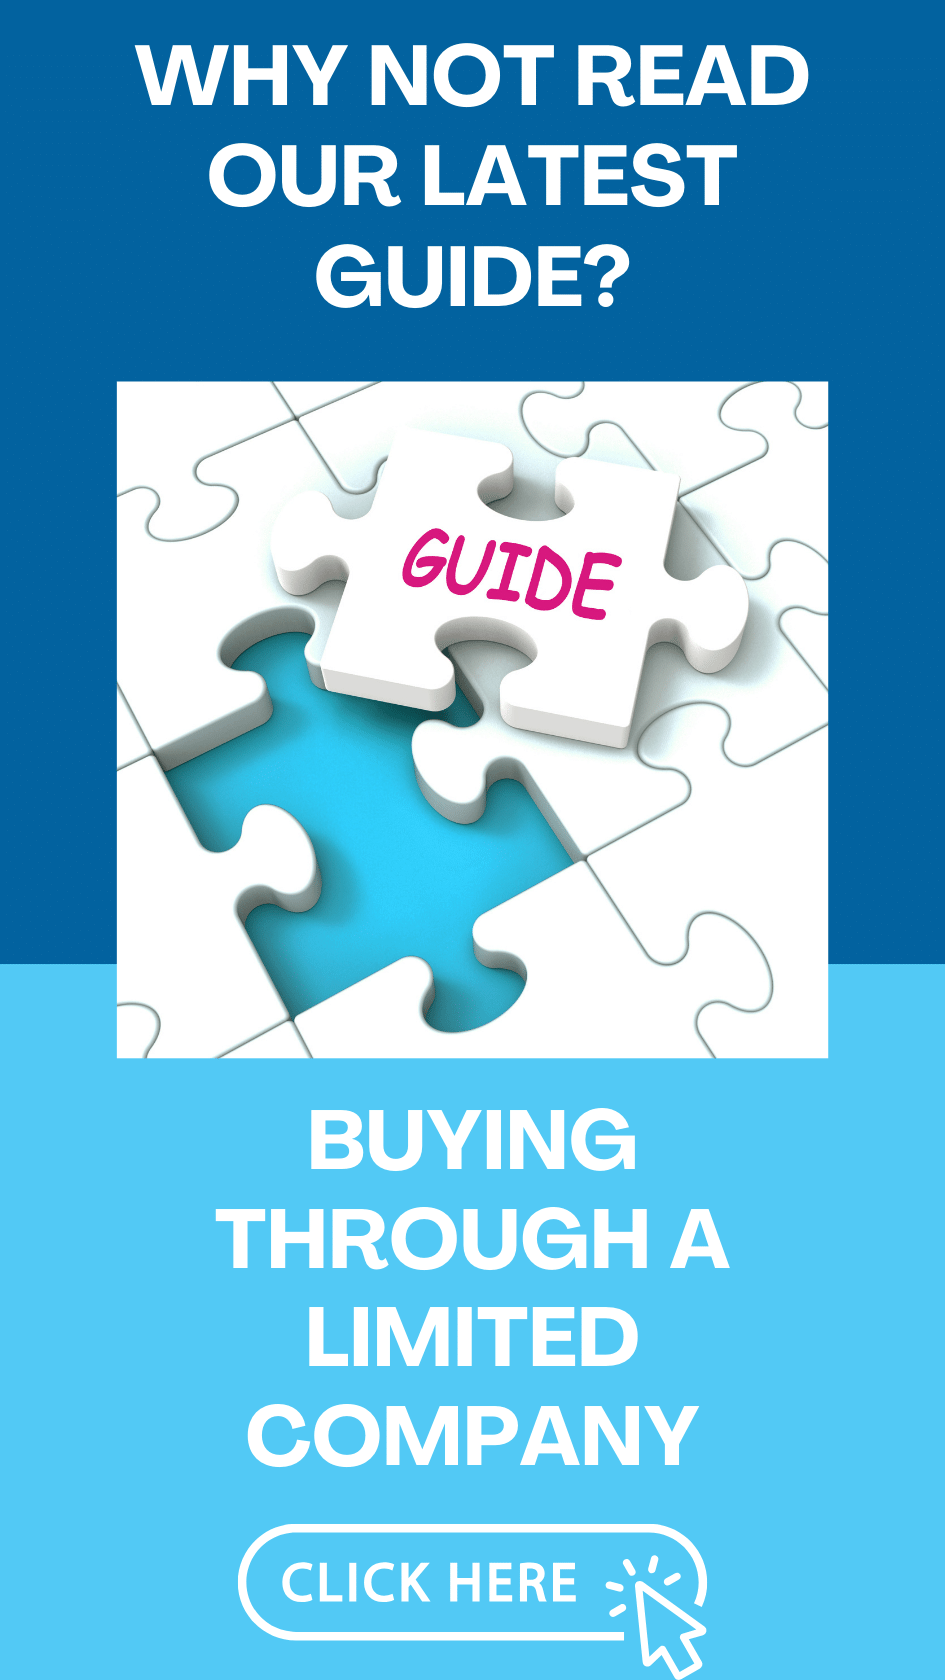 Buying through a limited company